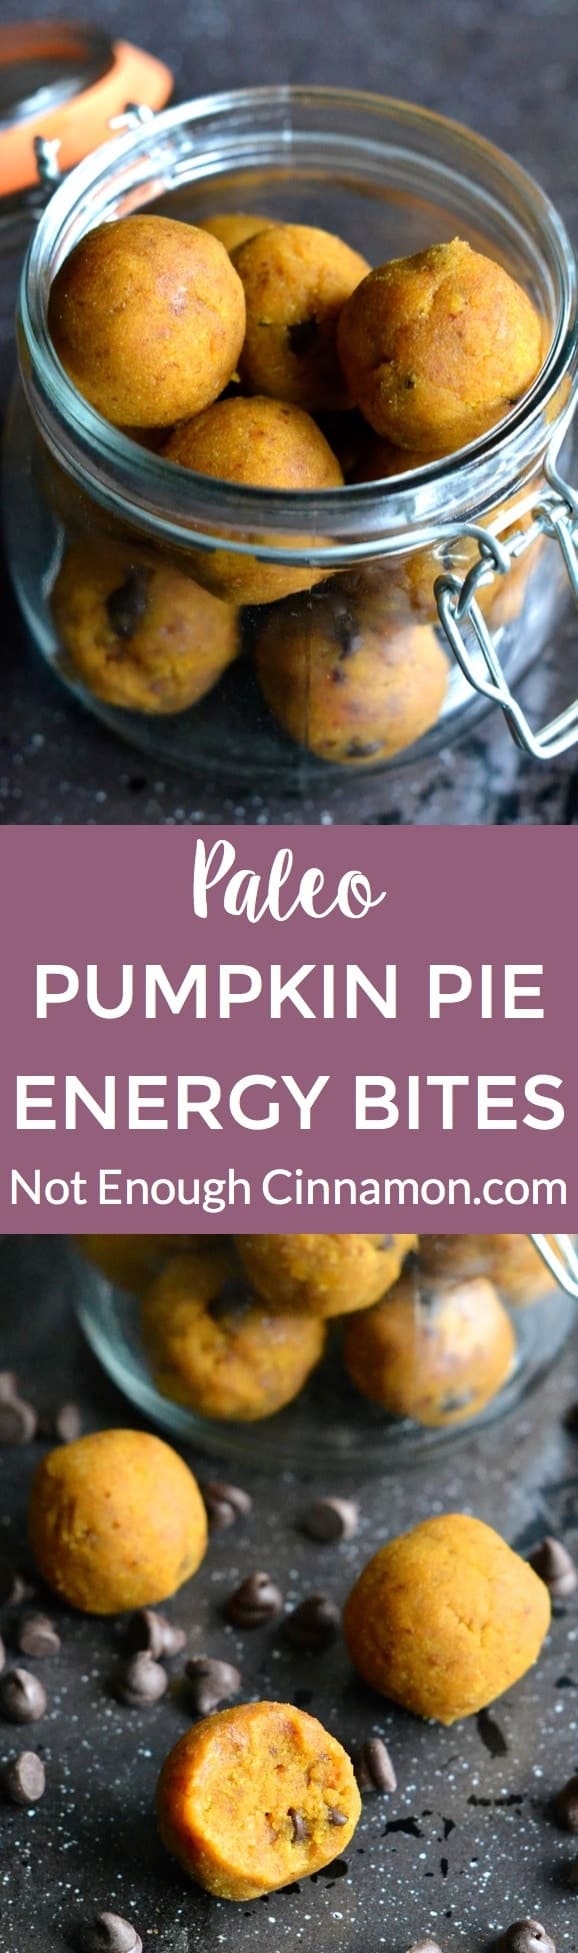 You only need 4 ingredients and 15 minutes to make these Paleo energy bites. The perfect Fall snack! | Find the recipe on NotEnoughCinnamon.com #snack #pumpkin